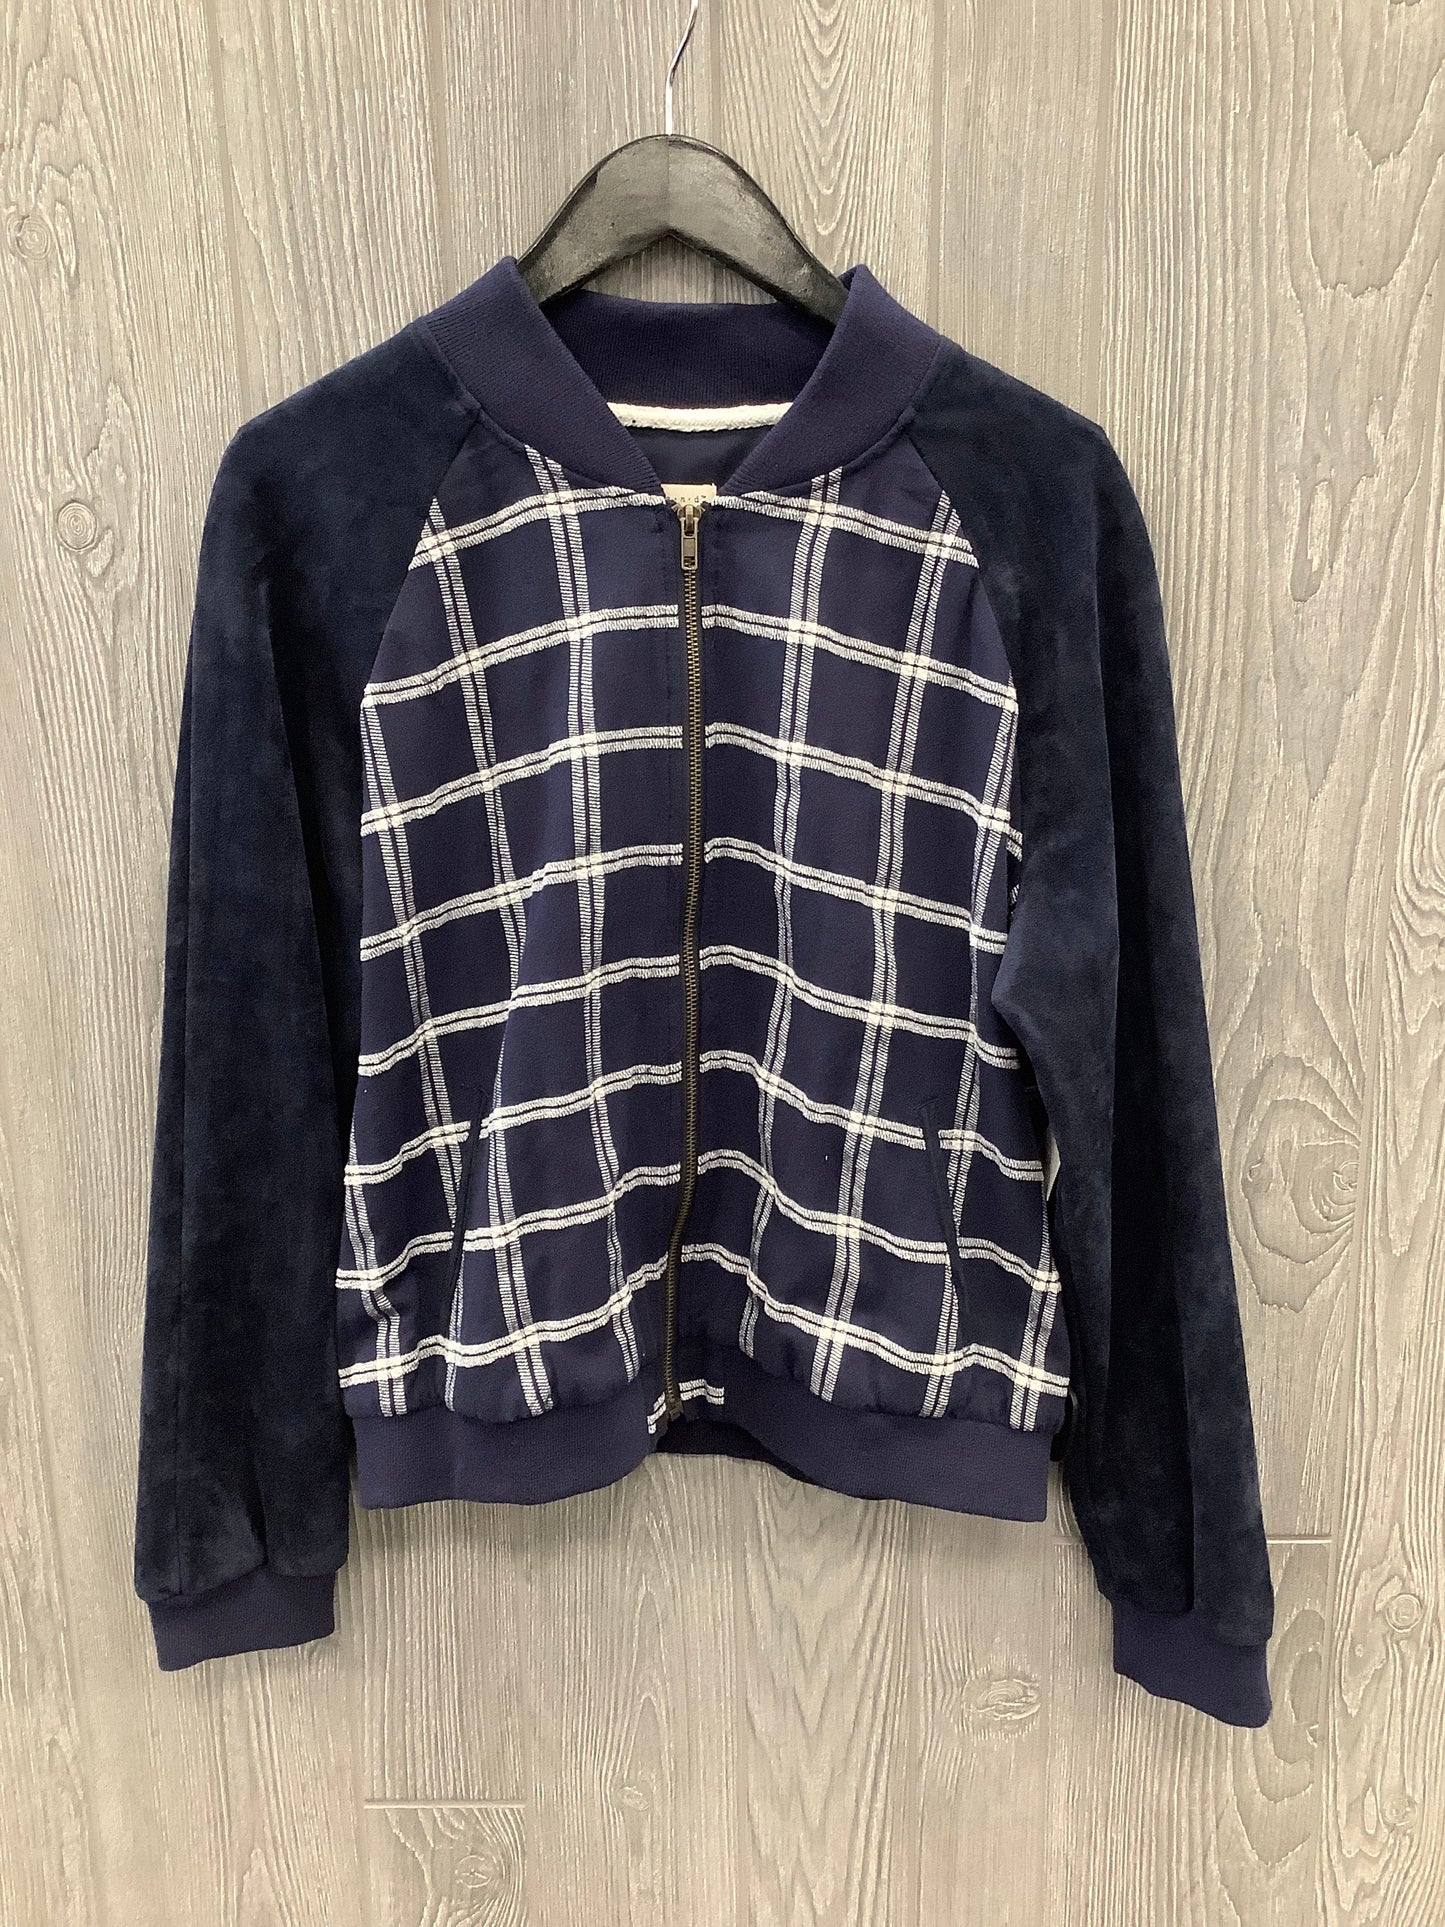 Jacket Other By A New Day  Size: Xl